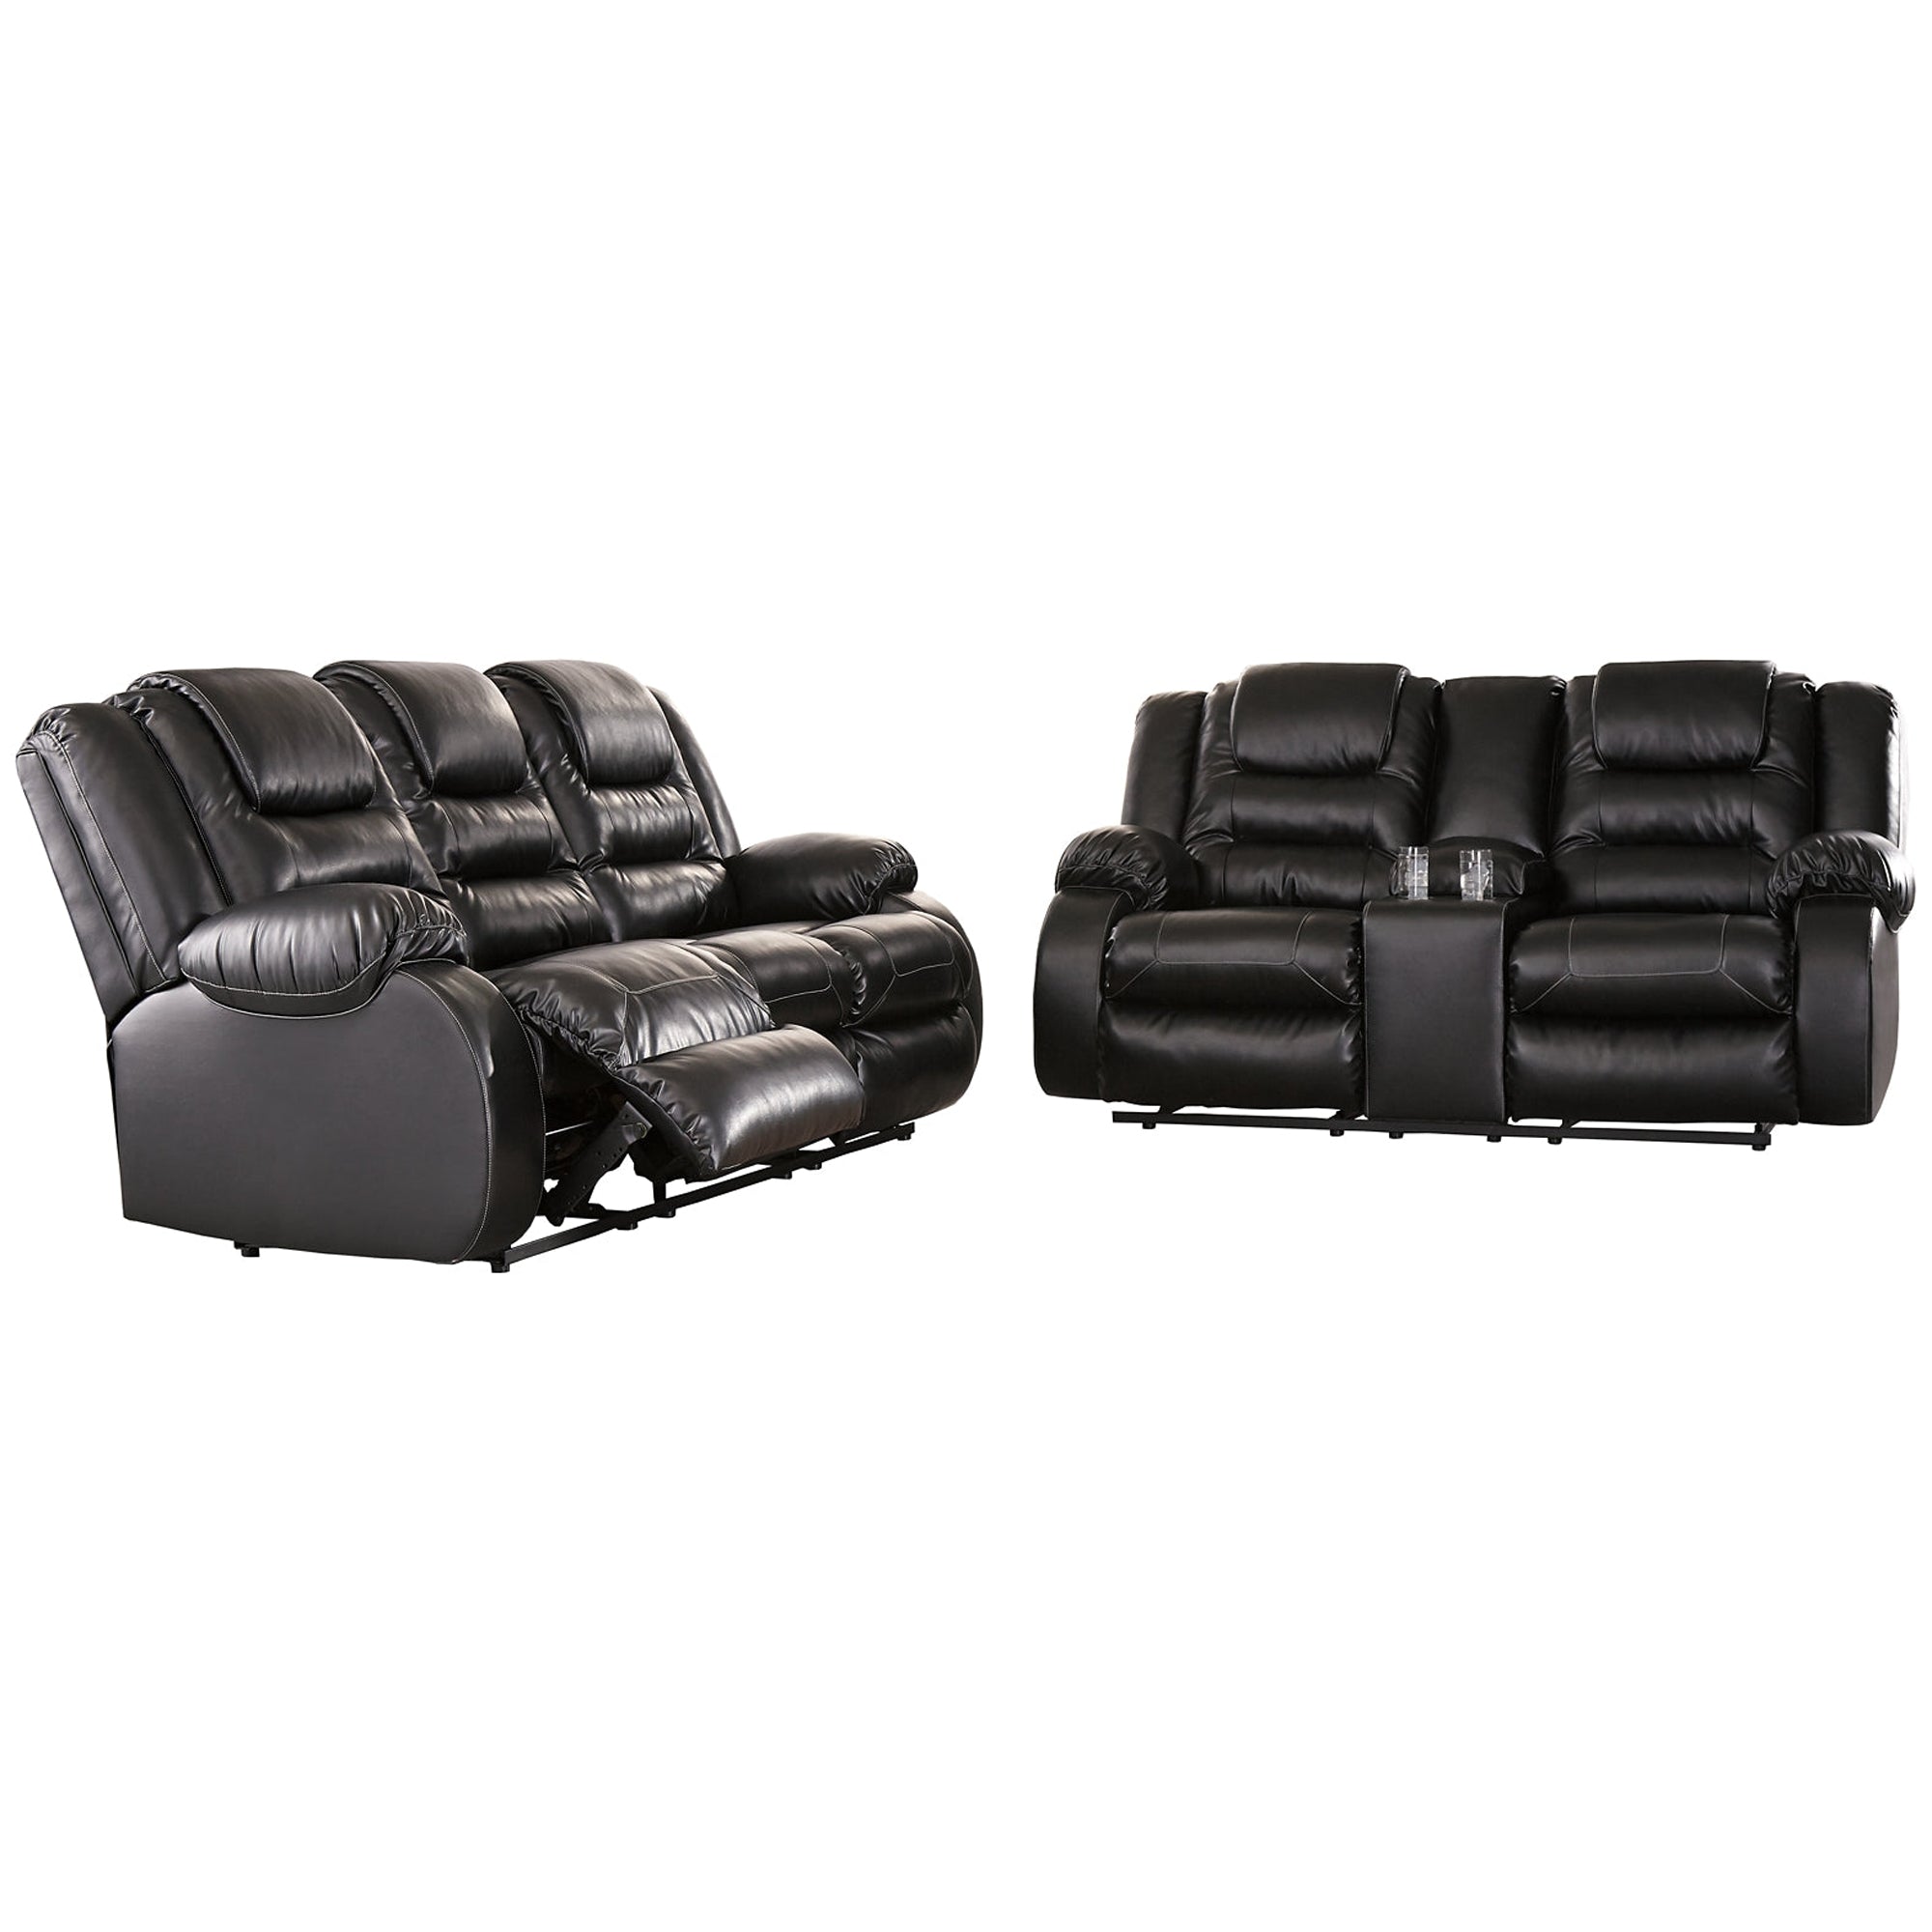 Vacherie Manual Reclining Sofa and Loveseat Set in Black